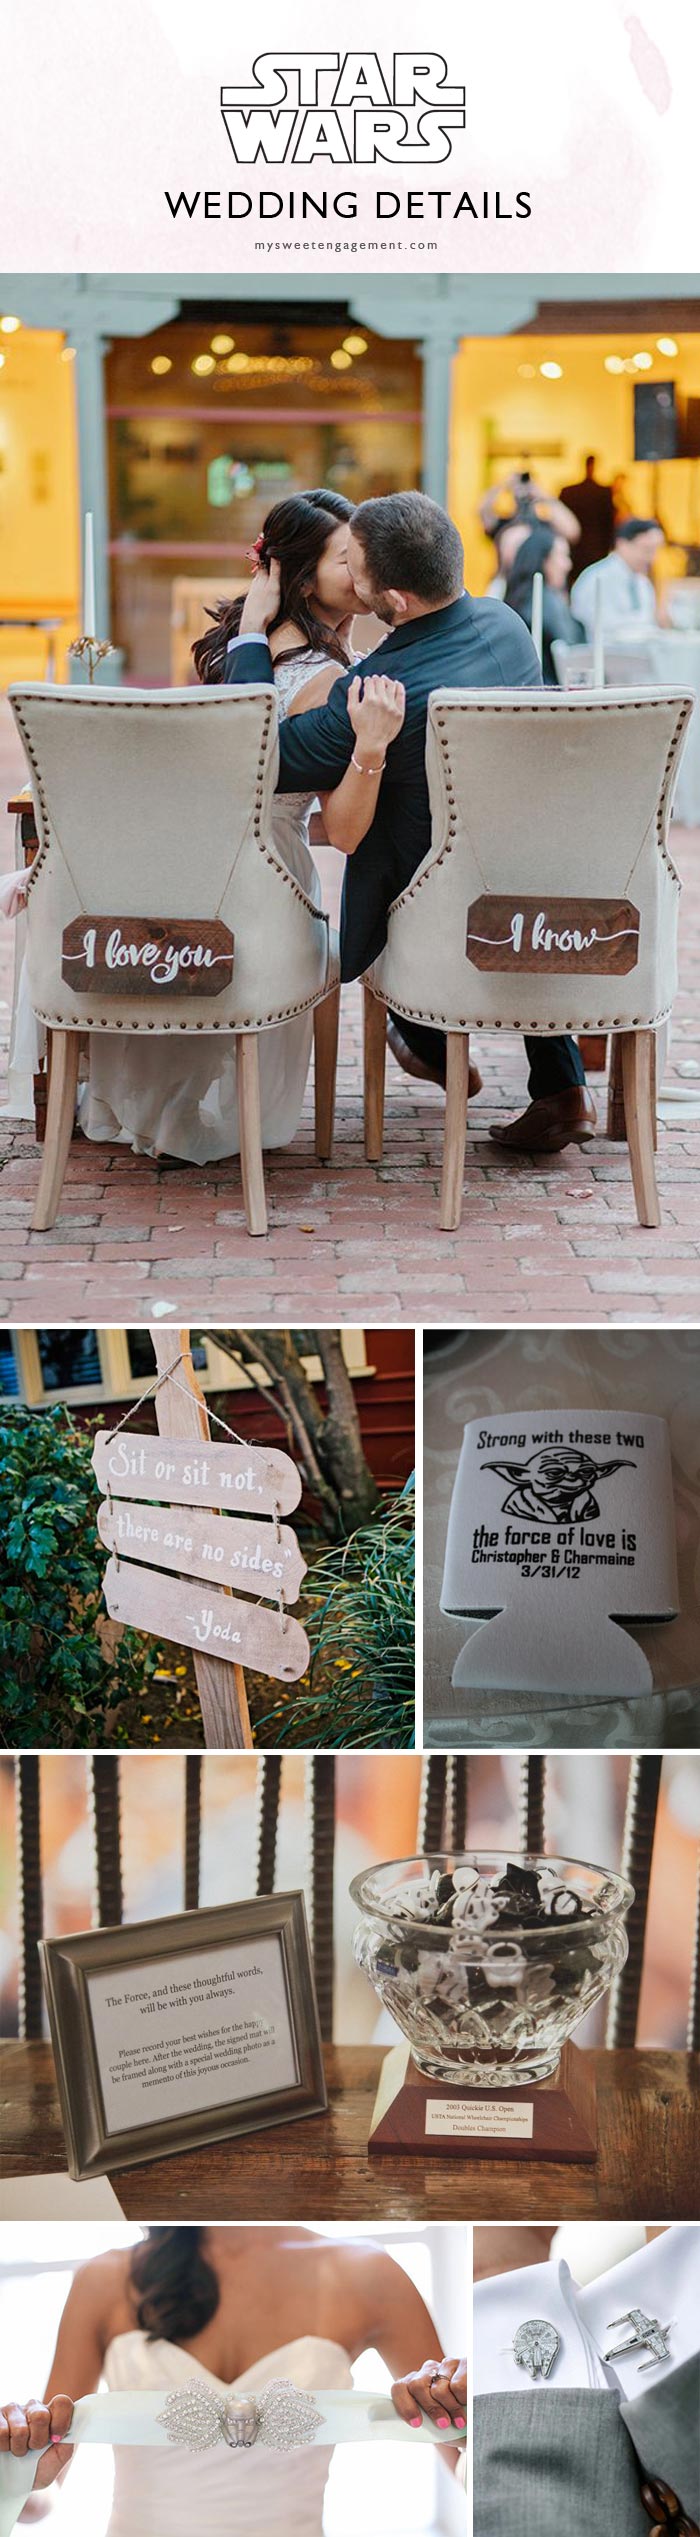 "I Love you. I know." Bride and Groom chair signs, other chair sign couple ideas: Princess + Jedi, Leia + Han. :) Wedding seating sign by Master Yoda. Star Wars wedding favors, guest book, bride and groom accessory details. // You're gonna love this Ultimate Guide for an Epic and Elegant Star Wars Wedding. // https://mysweetengagement.com